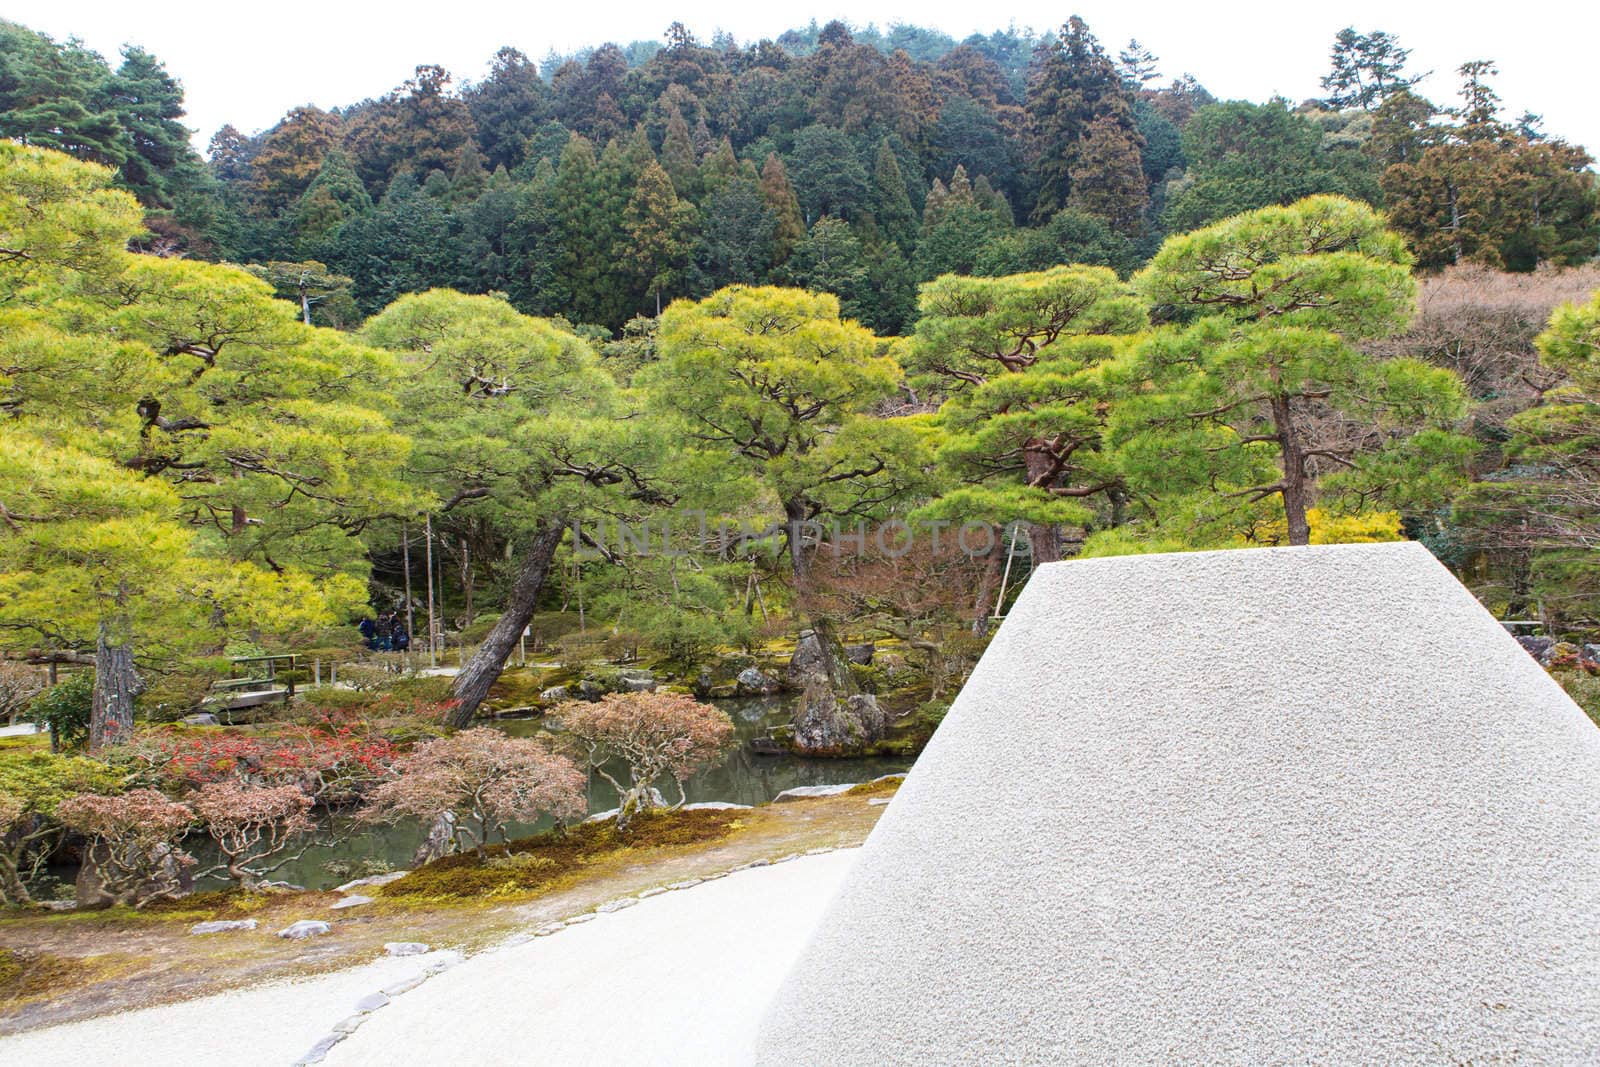 A perfectly manicured zen garden at Ginkakuji, the Silver Pavilion, in Kyoto, Japan